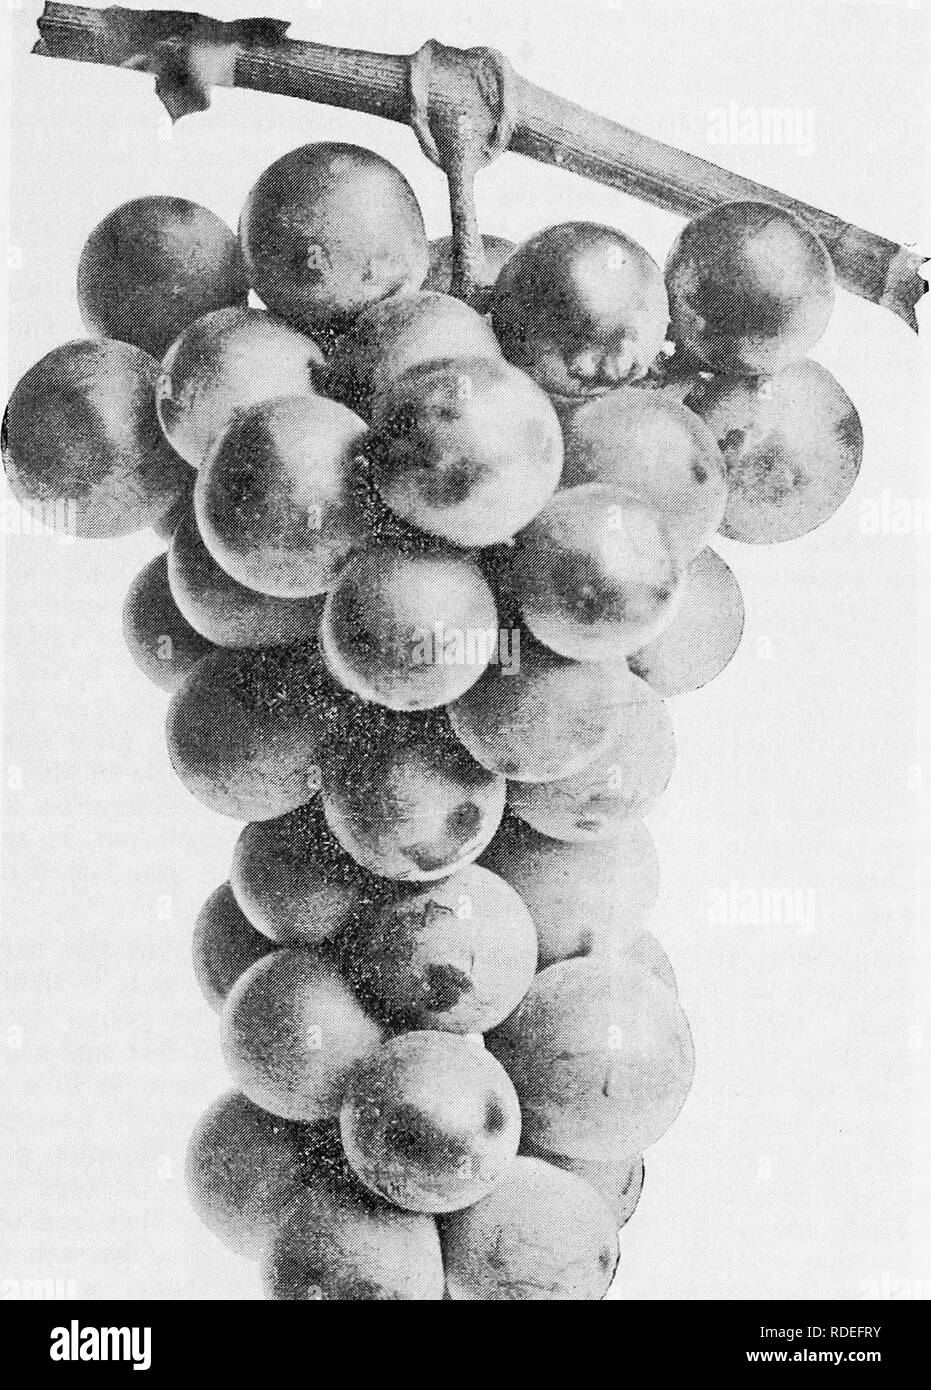 . The fruits of Ontario. Fruit-culture. 1905 [-^RUI'i'S OF ONTARIO. 217 WORDEN. The vines of the AVorden are almost identical in character and appearance with its parent, the Concord. When first introduced it was thought to be superior to that variety for the main crop, but it has proved to be so only in its earliness, ripeninis; a few days in advance. Origin: S. Worden, Minnettoo, N. Y., from Concord seed. Vine: strong, vigorous grower, with coarse stout foliage, dark green above, rusty underneath; very hardy, healthy and very productive. Word EN. Bunch: large, compact, shouldered. Berey : la Stock Photo